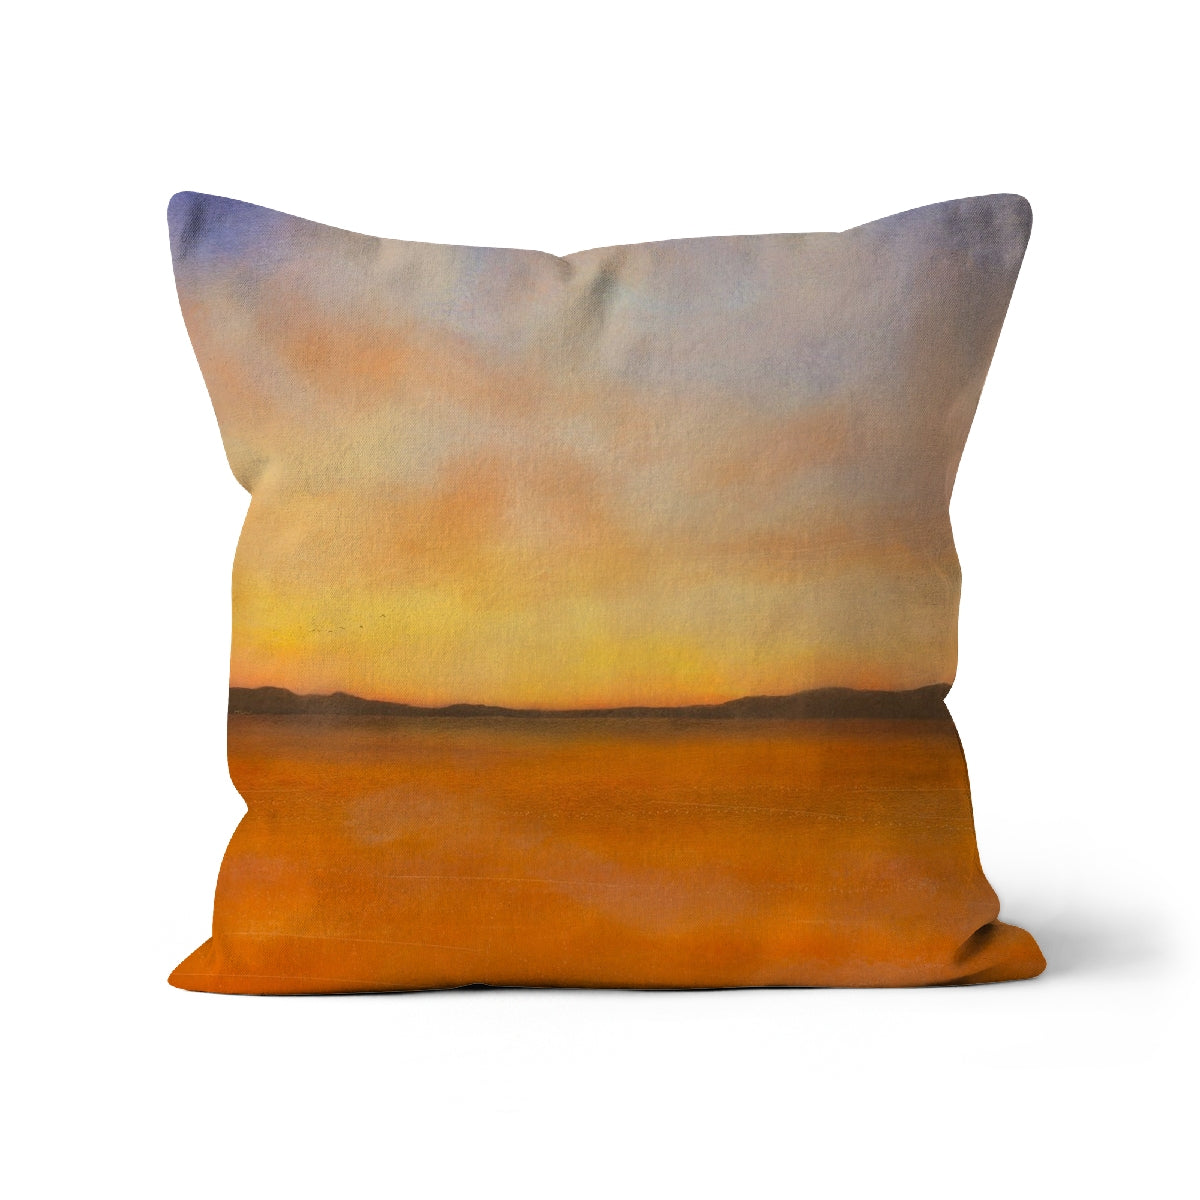 Islay Dawn Art Gifts Cushion-Cushions-Hebridean Islands Art Gallery-Canvas-22"x22"-Paintings, Prints, Homeware, Art Gifts From Scotland By Scottish Artist Kevin Hunter